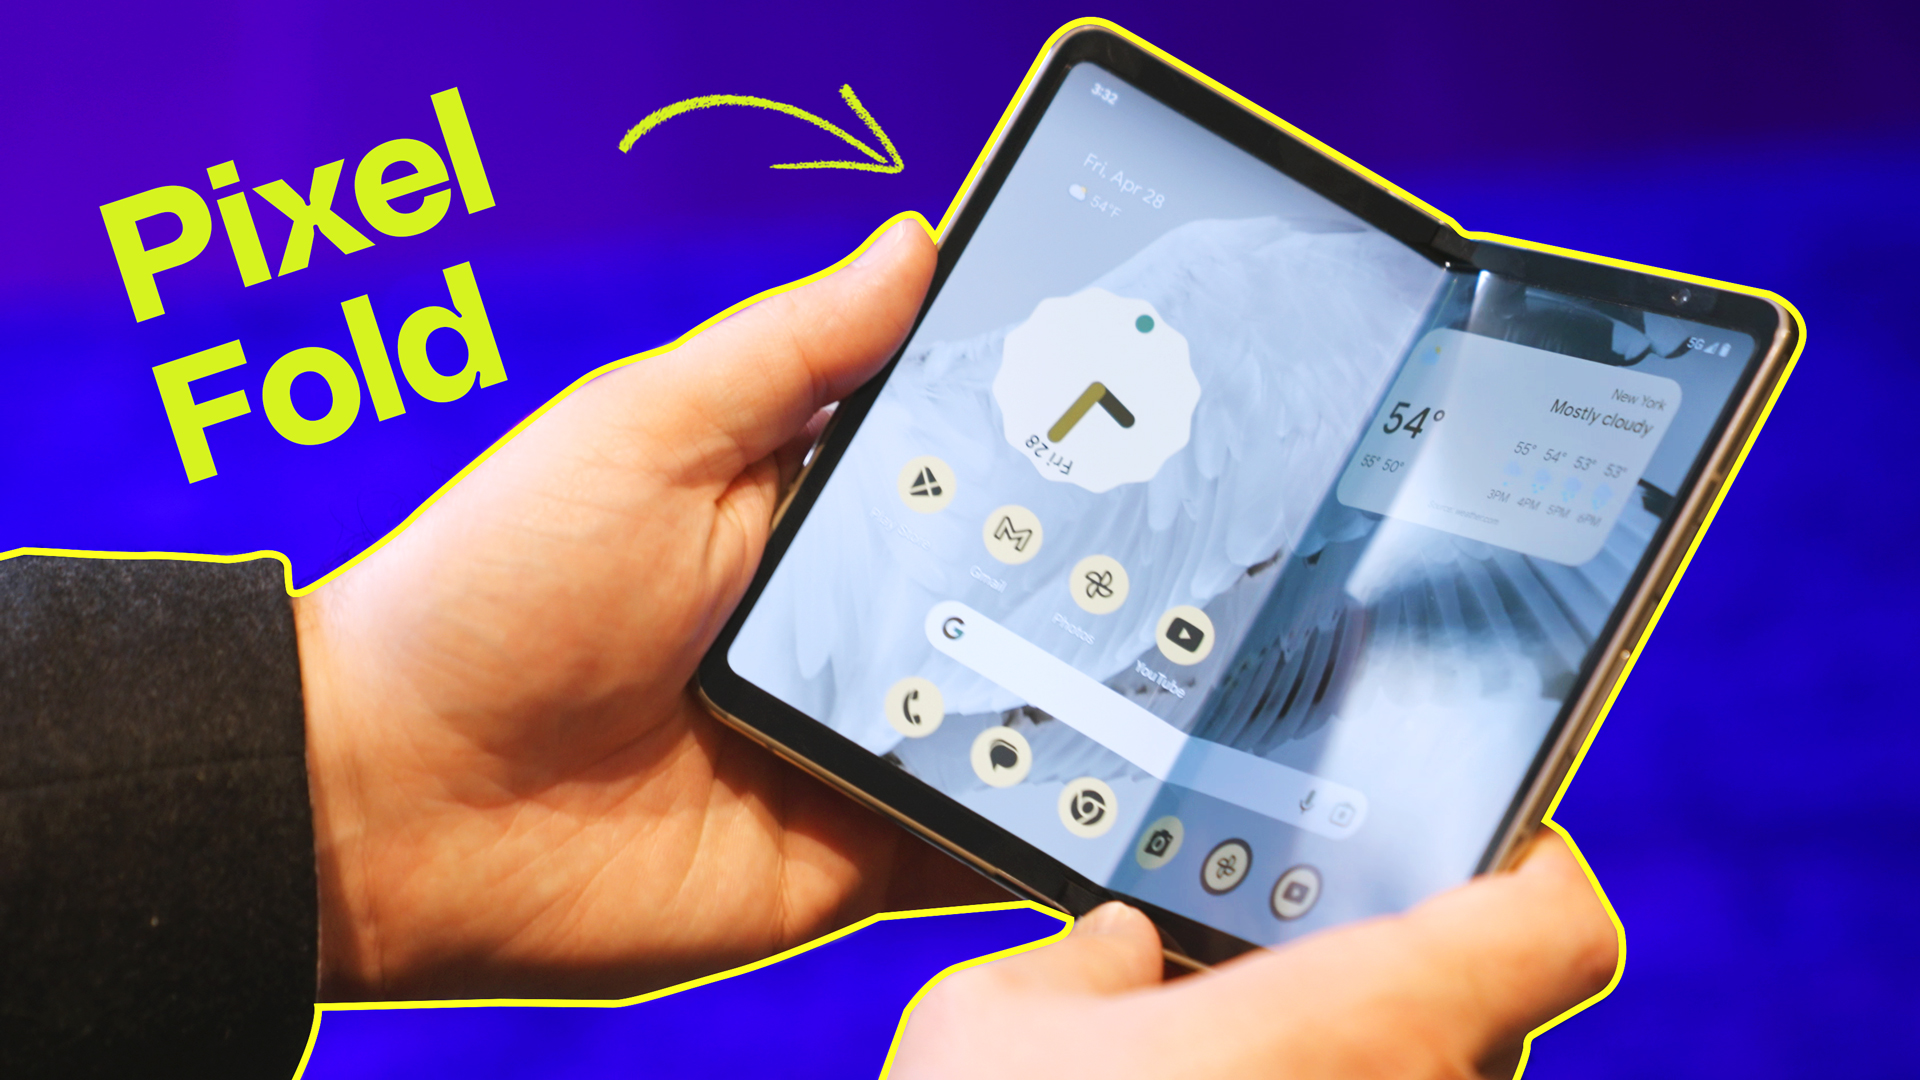 Google Pixel Fold release date and where to pre-order